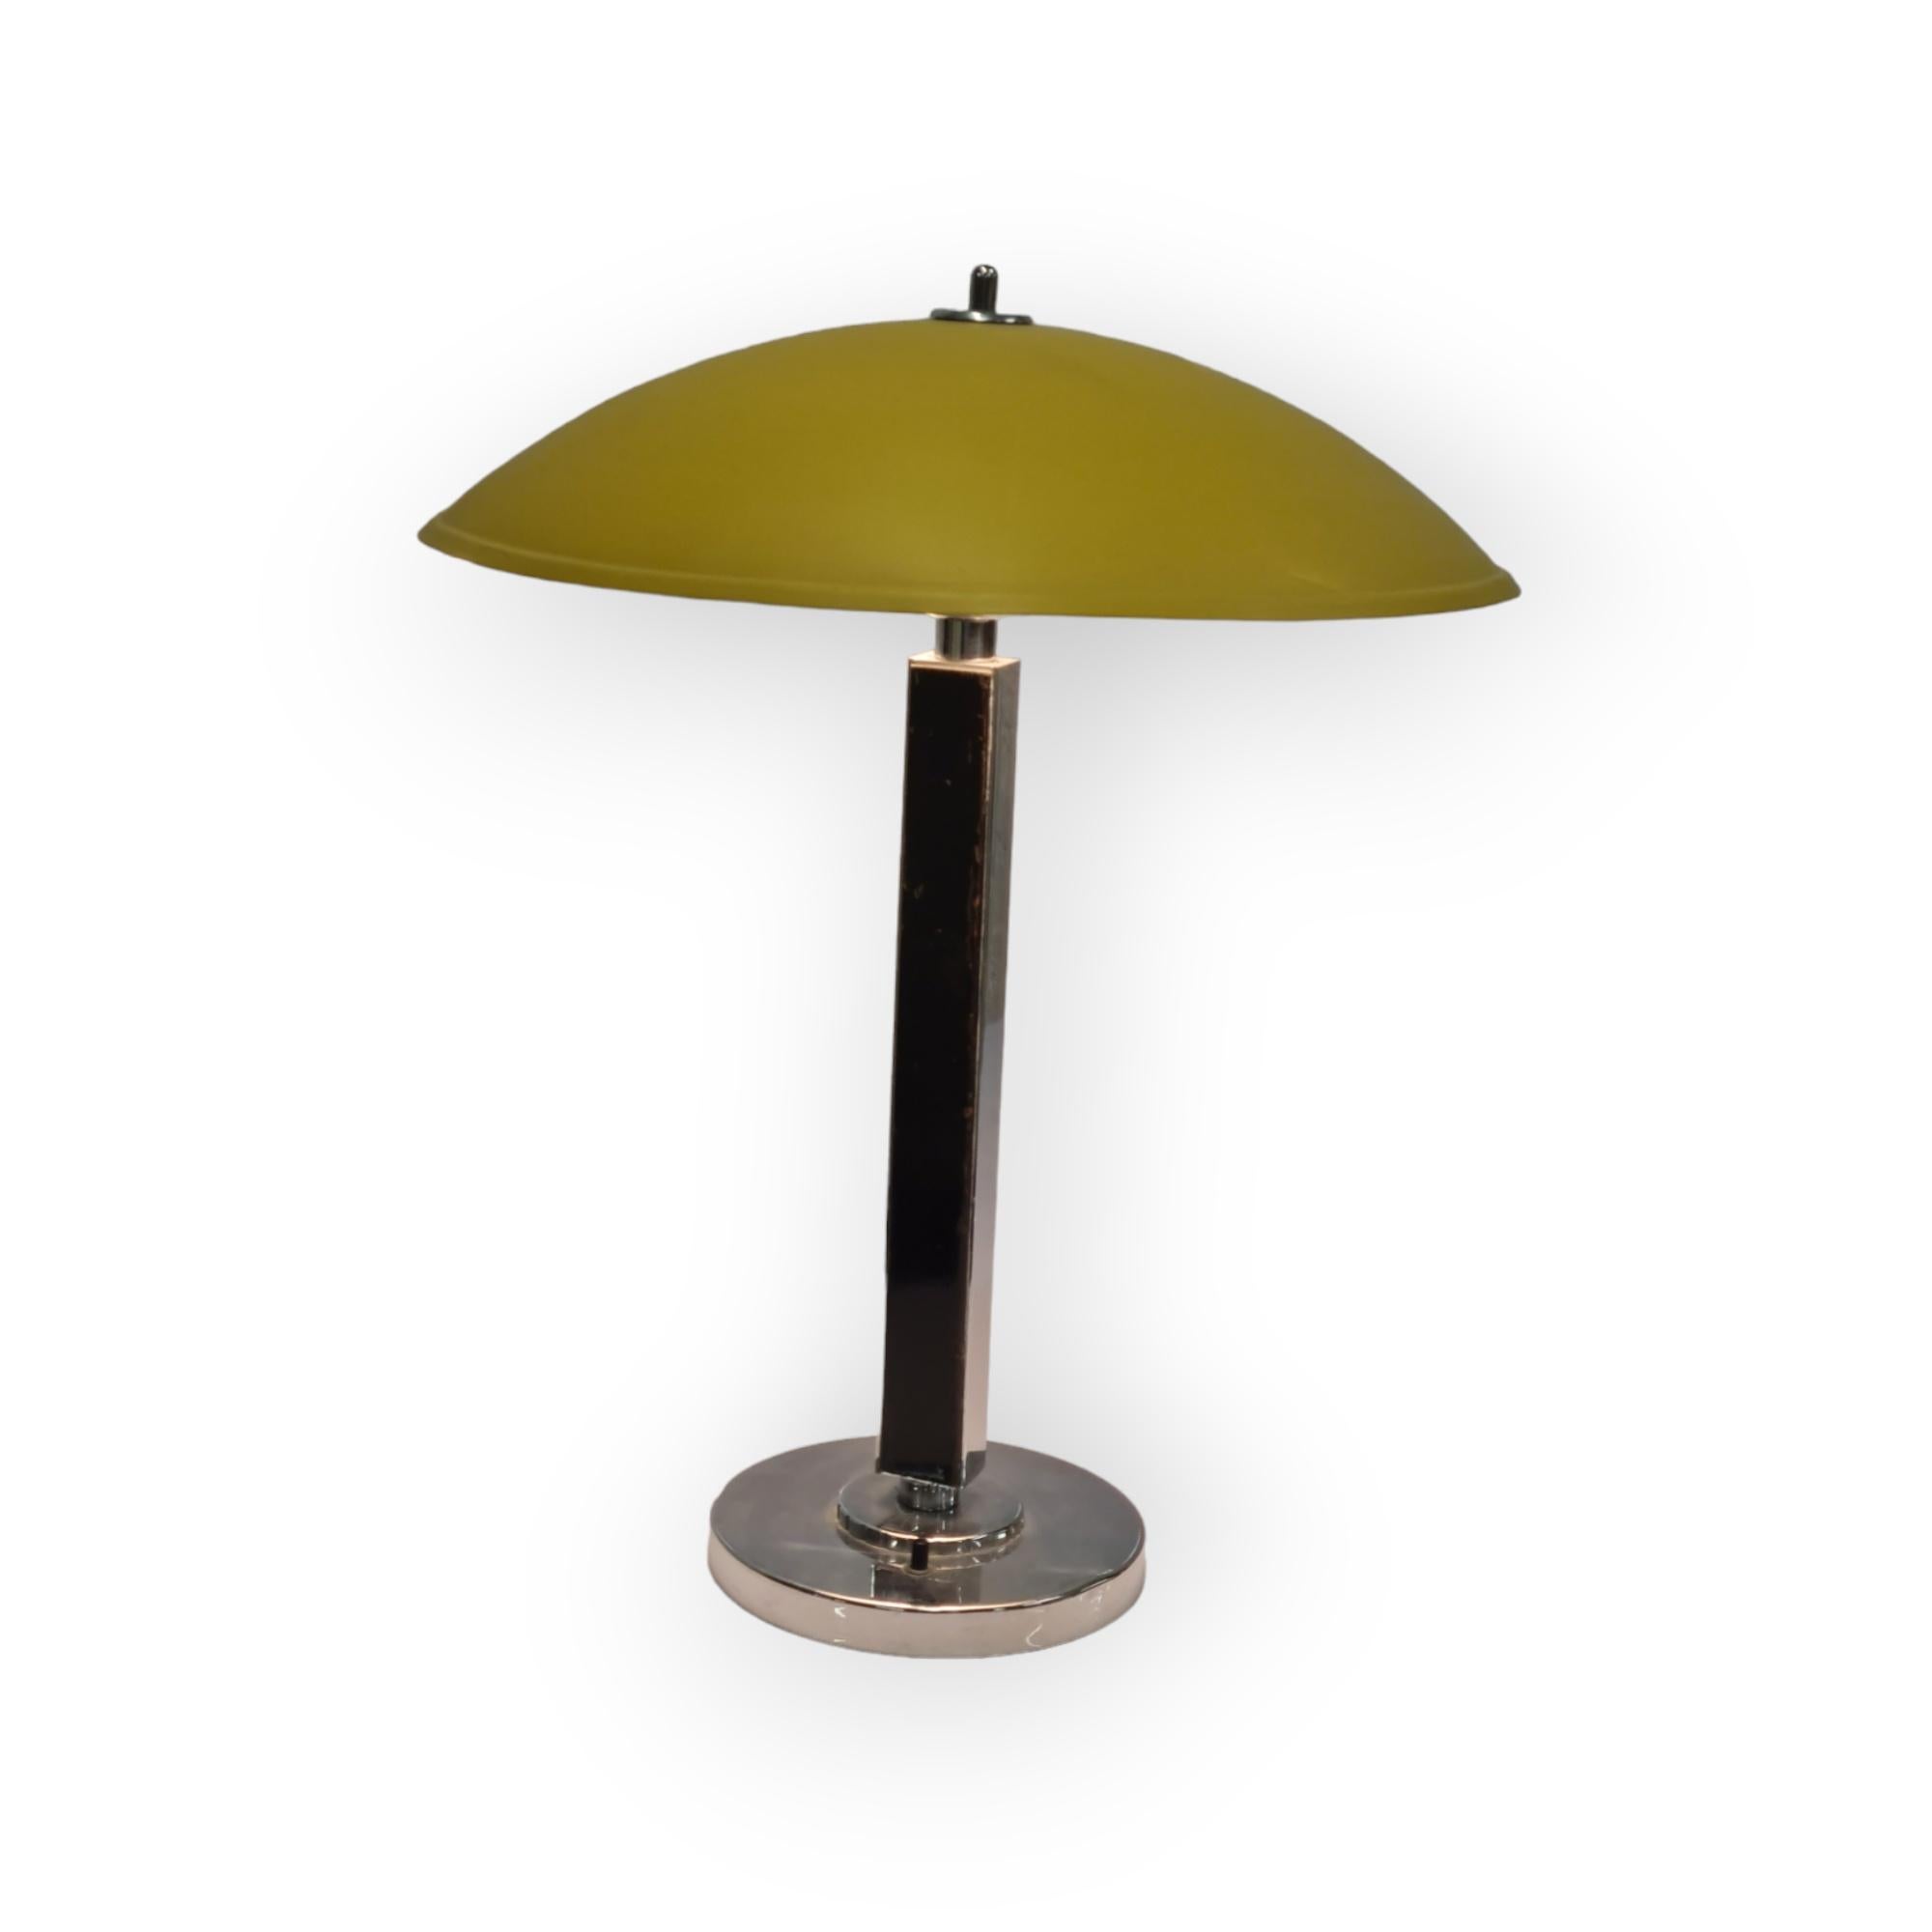 This is an exceedingly rare version of the Gunilla Jung table lamp designed in 1936-37 for Orno and exhibited at the 1937 Paris world exposition.

This fine example is believed to be a unique version of this lamp due to the strickingly beautiful